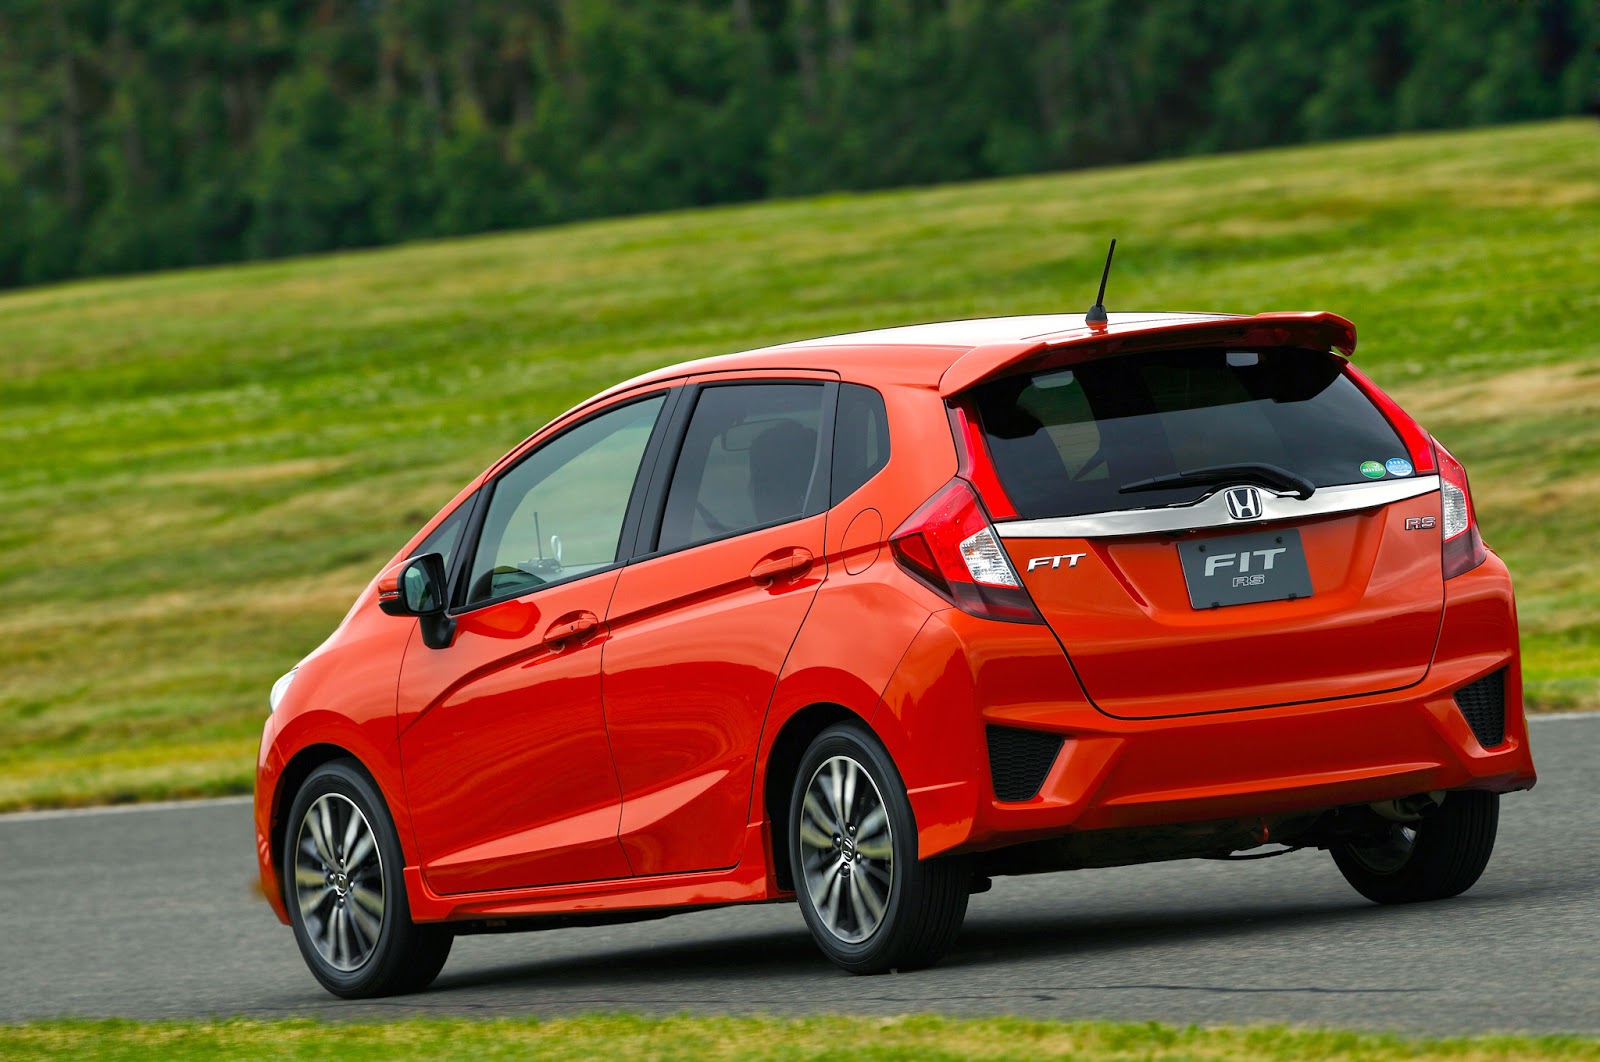 2015 Honda Fit Model,Engine and Redesign